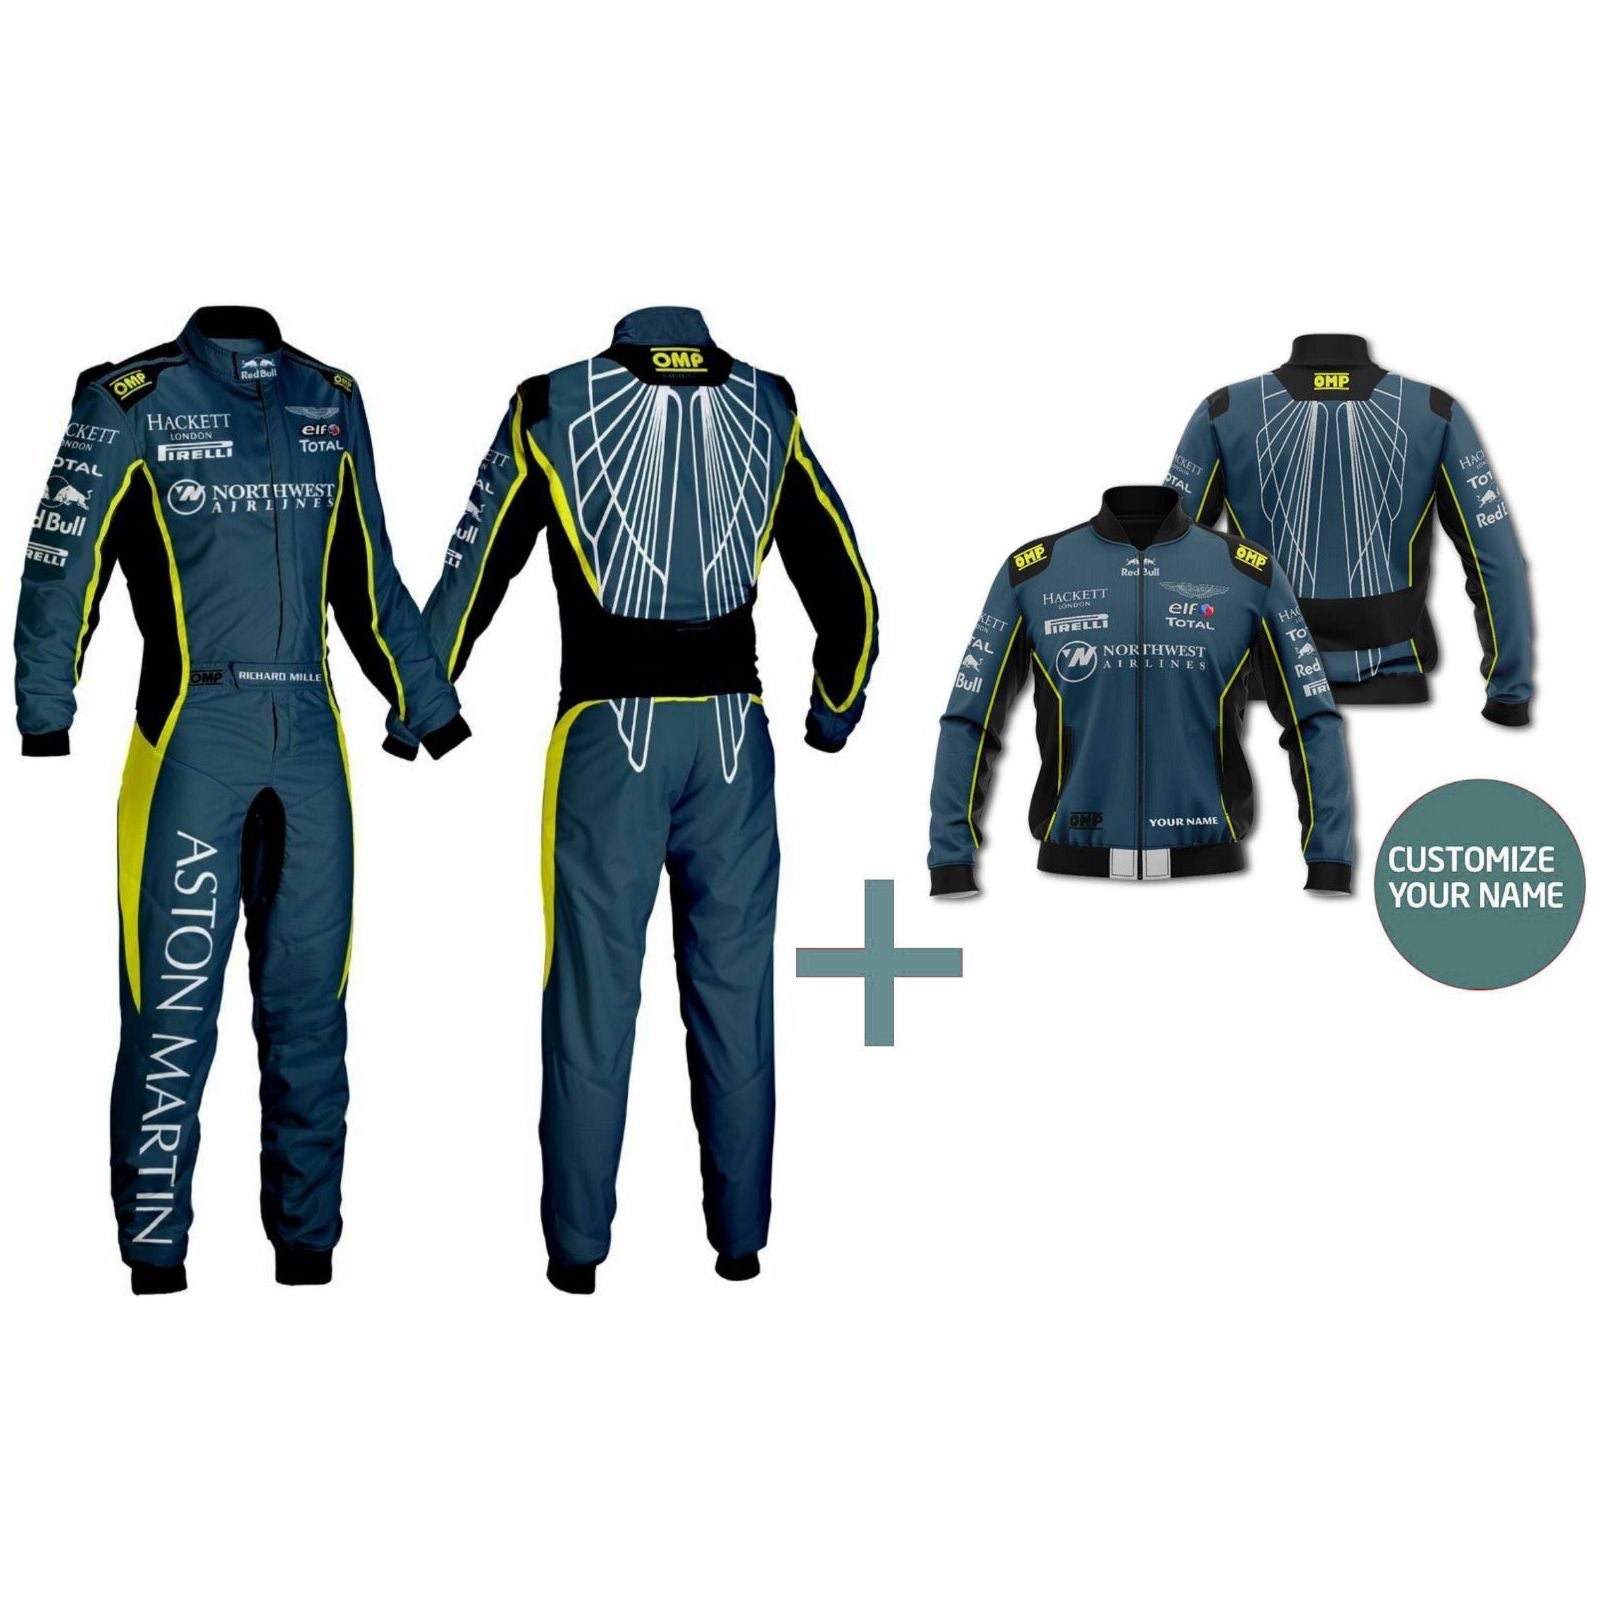 Racing Costume: Compact Impact Suit for Go Kart in [All Sizes]